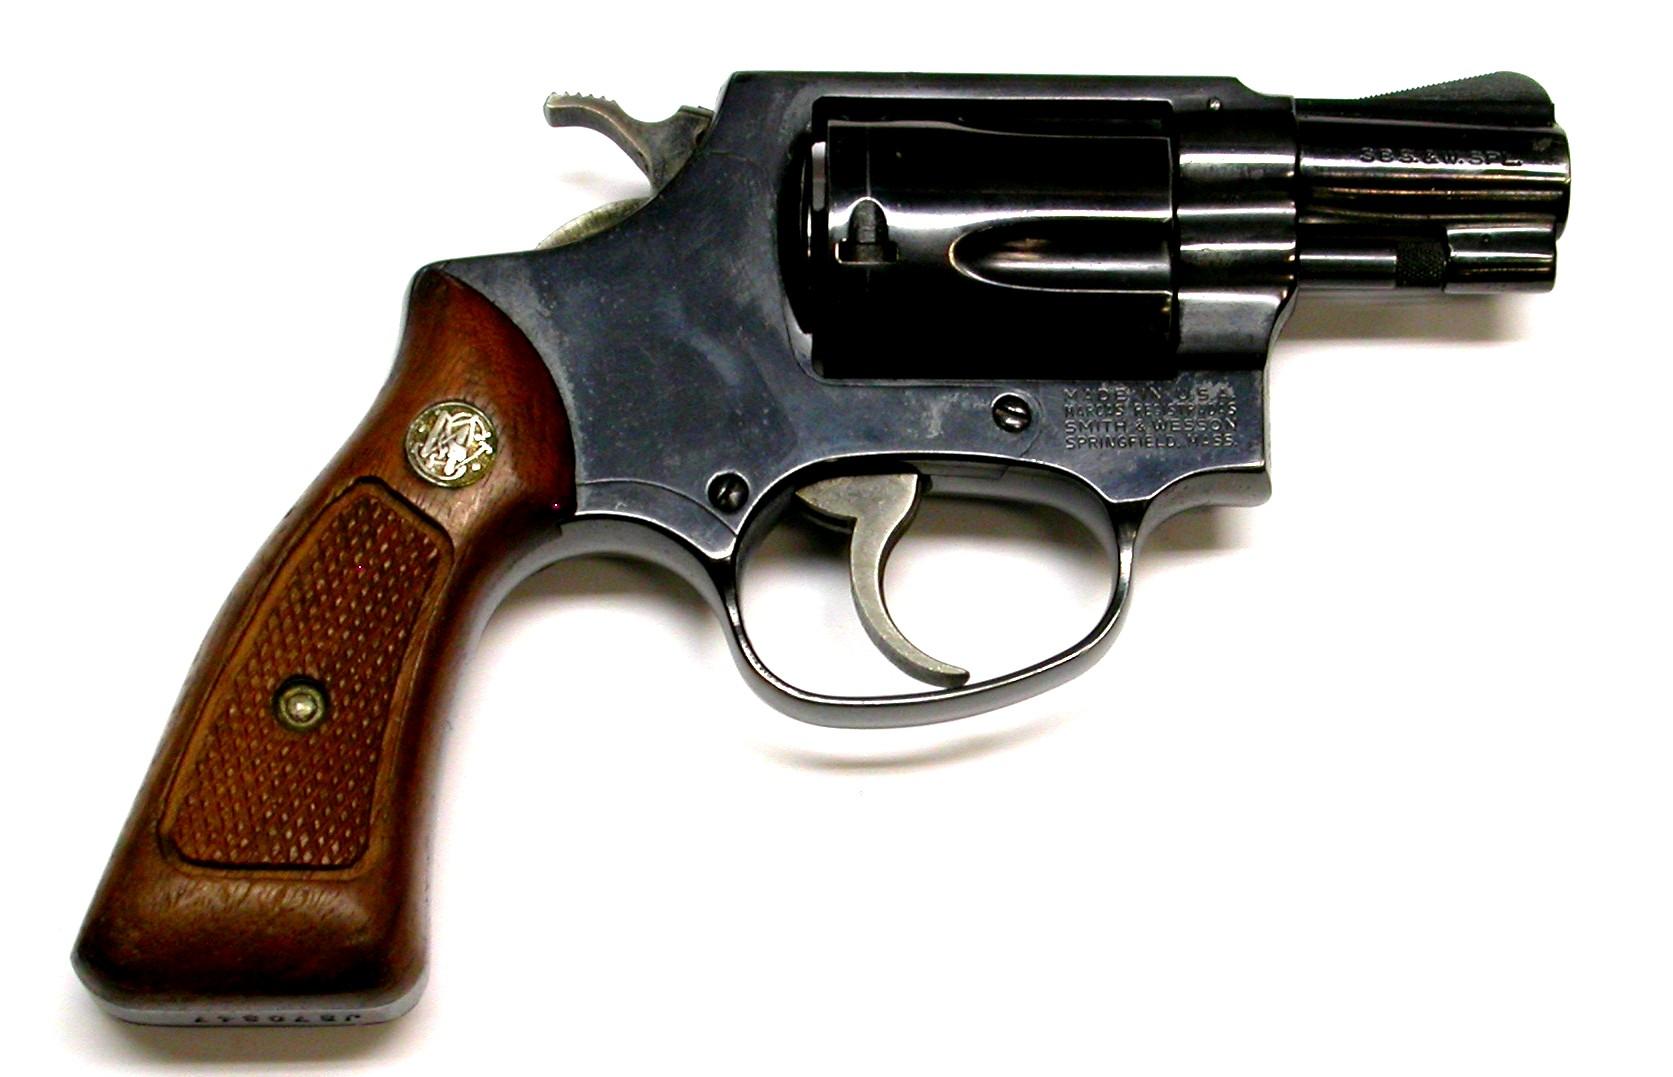 Smith & Wesson Model 36 .38 Special Double-Action Revolver - FFL #J370347 (AWK)